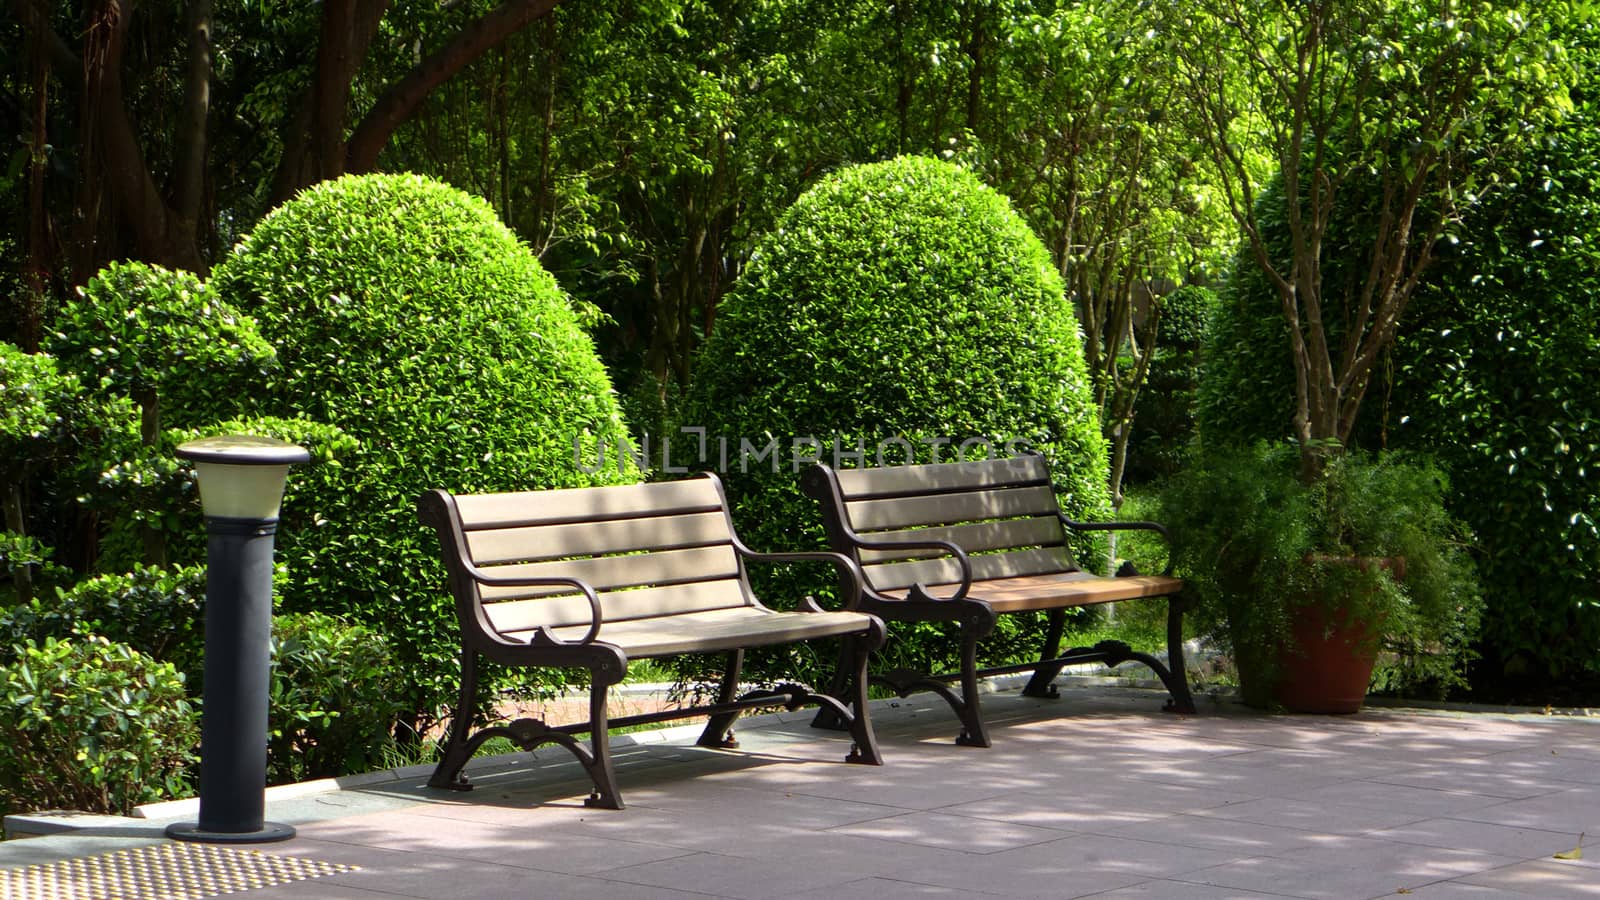 Green plants and benches in formal garden by cougarsan